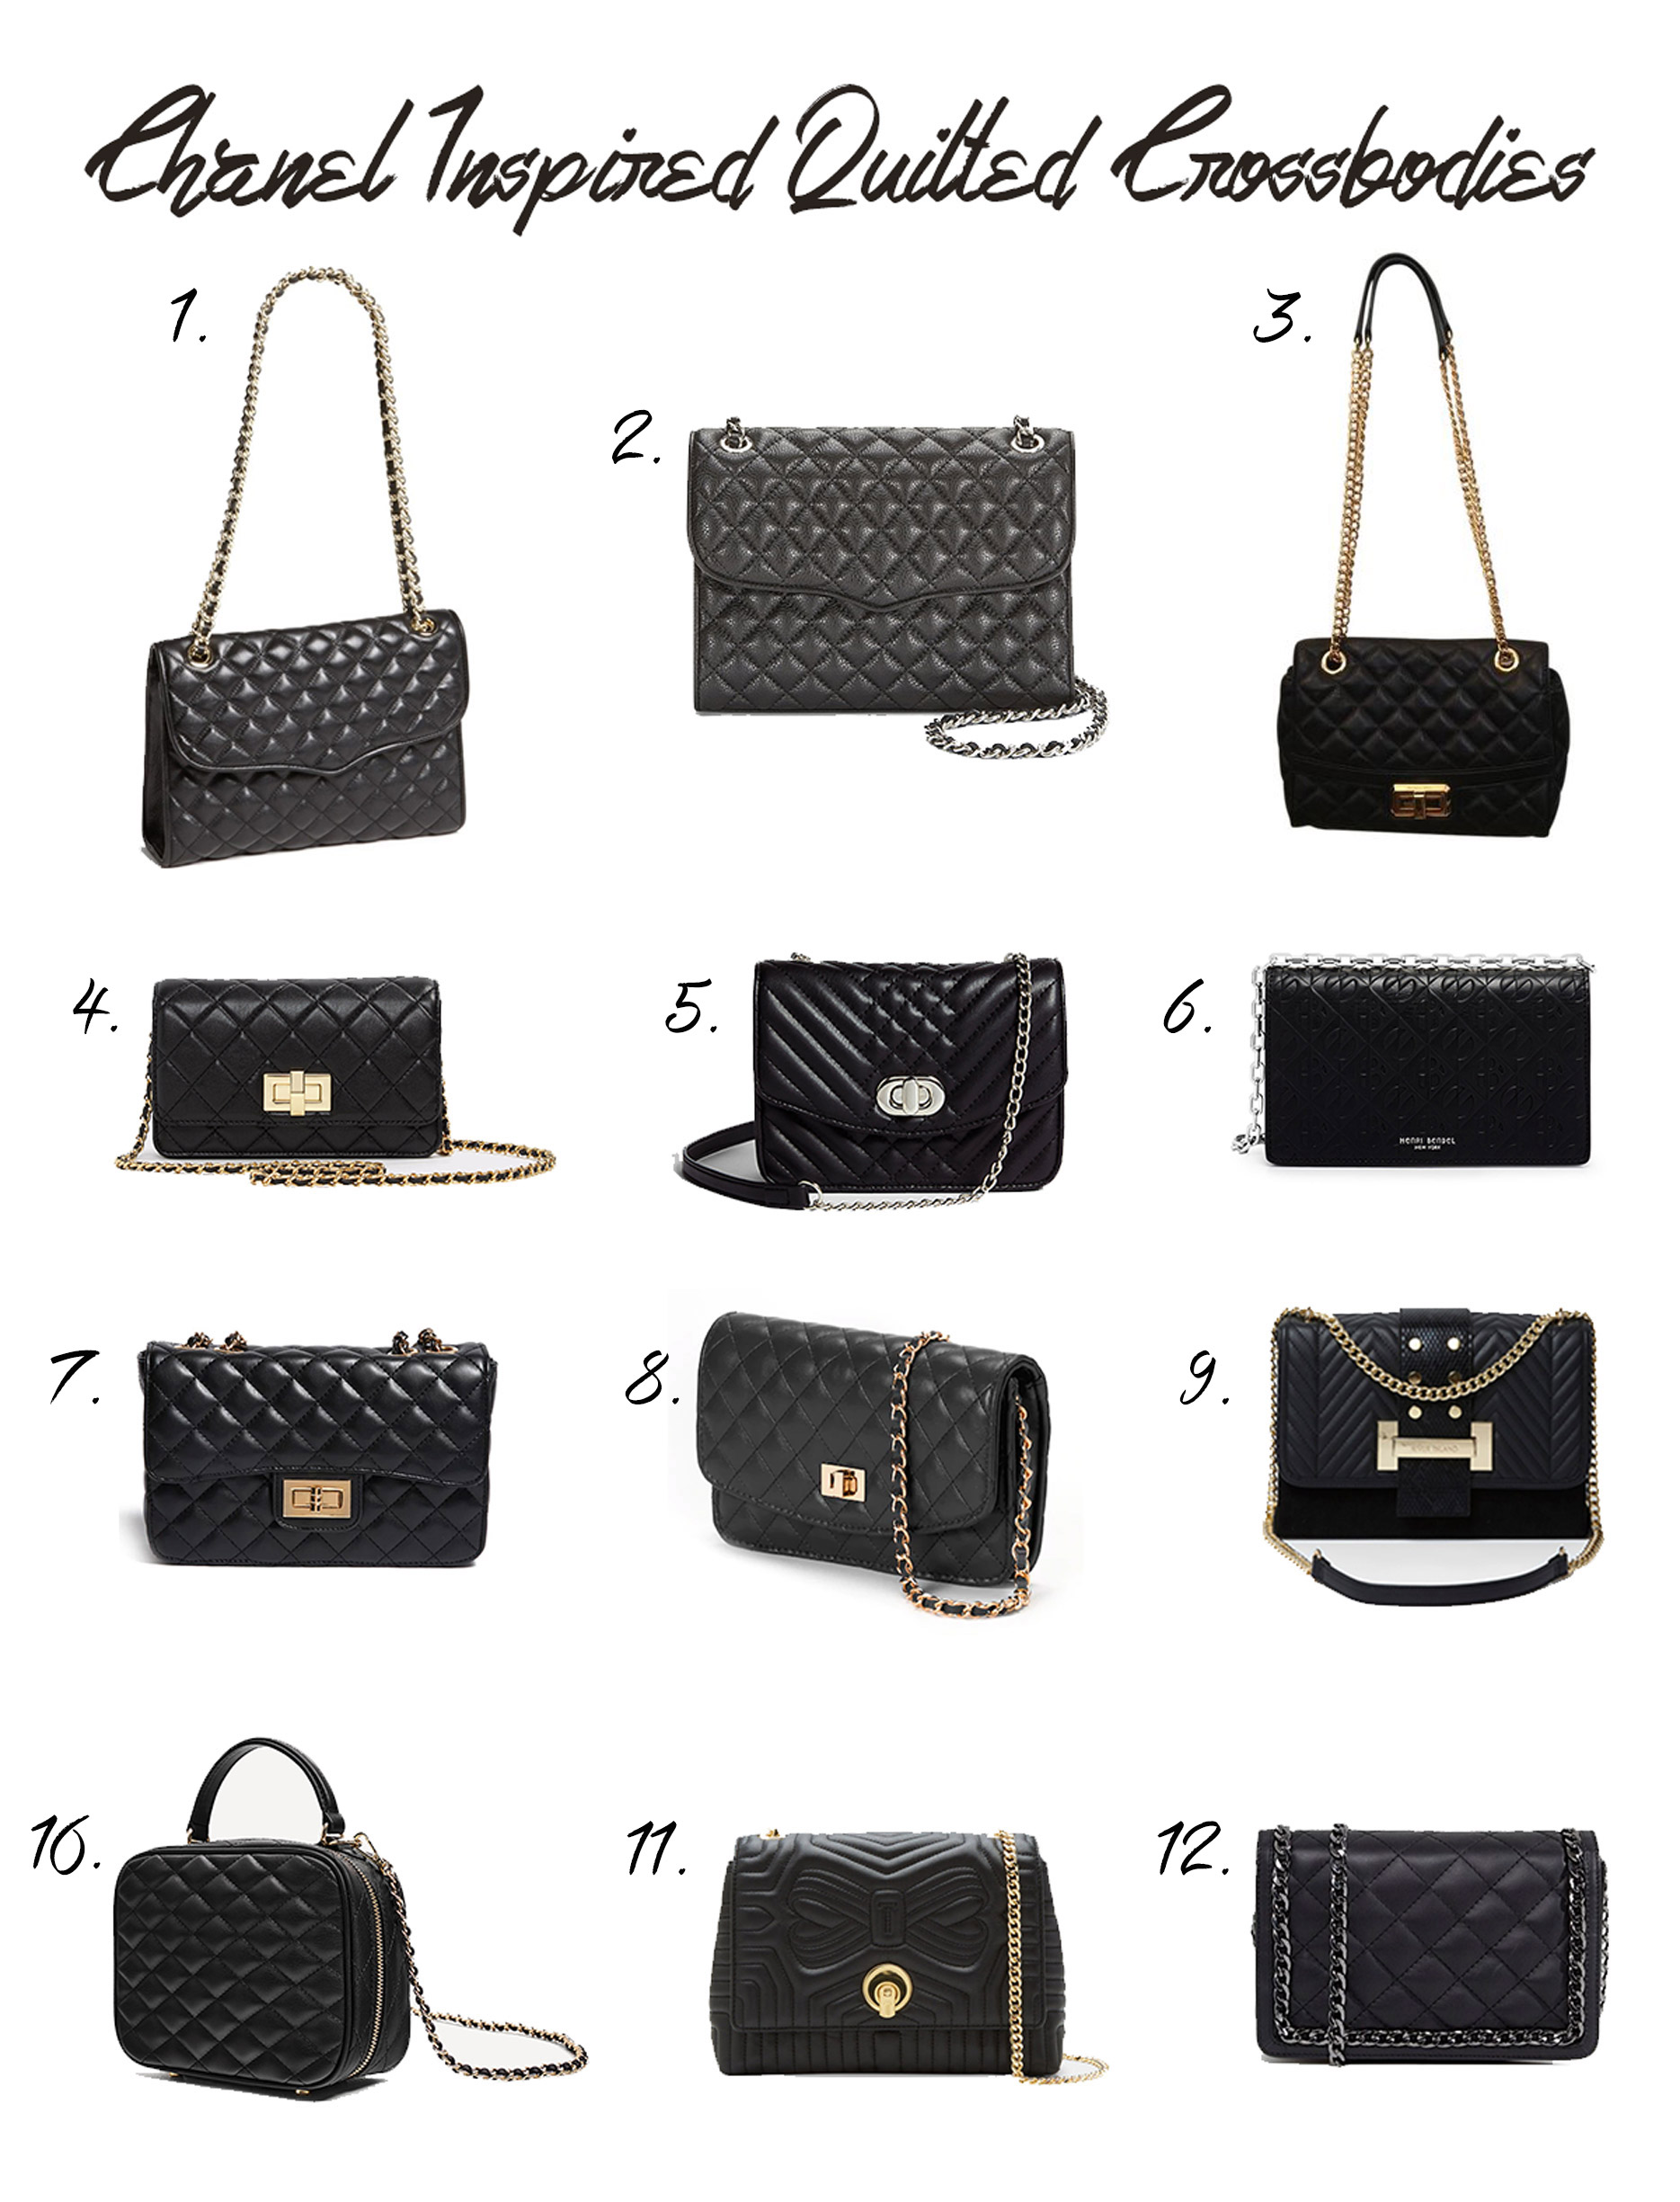 Chanel Inspired Bags for Less